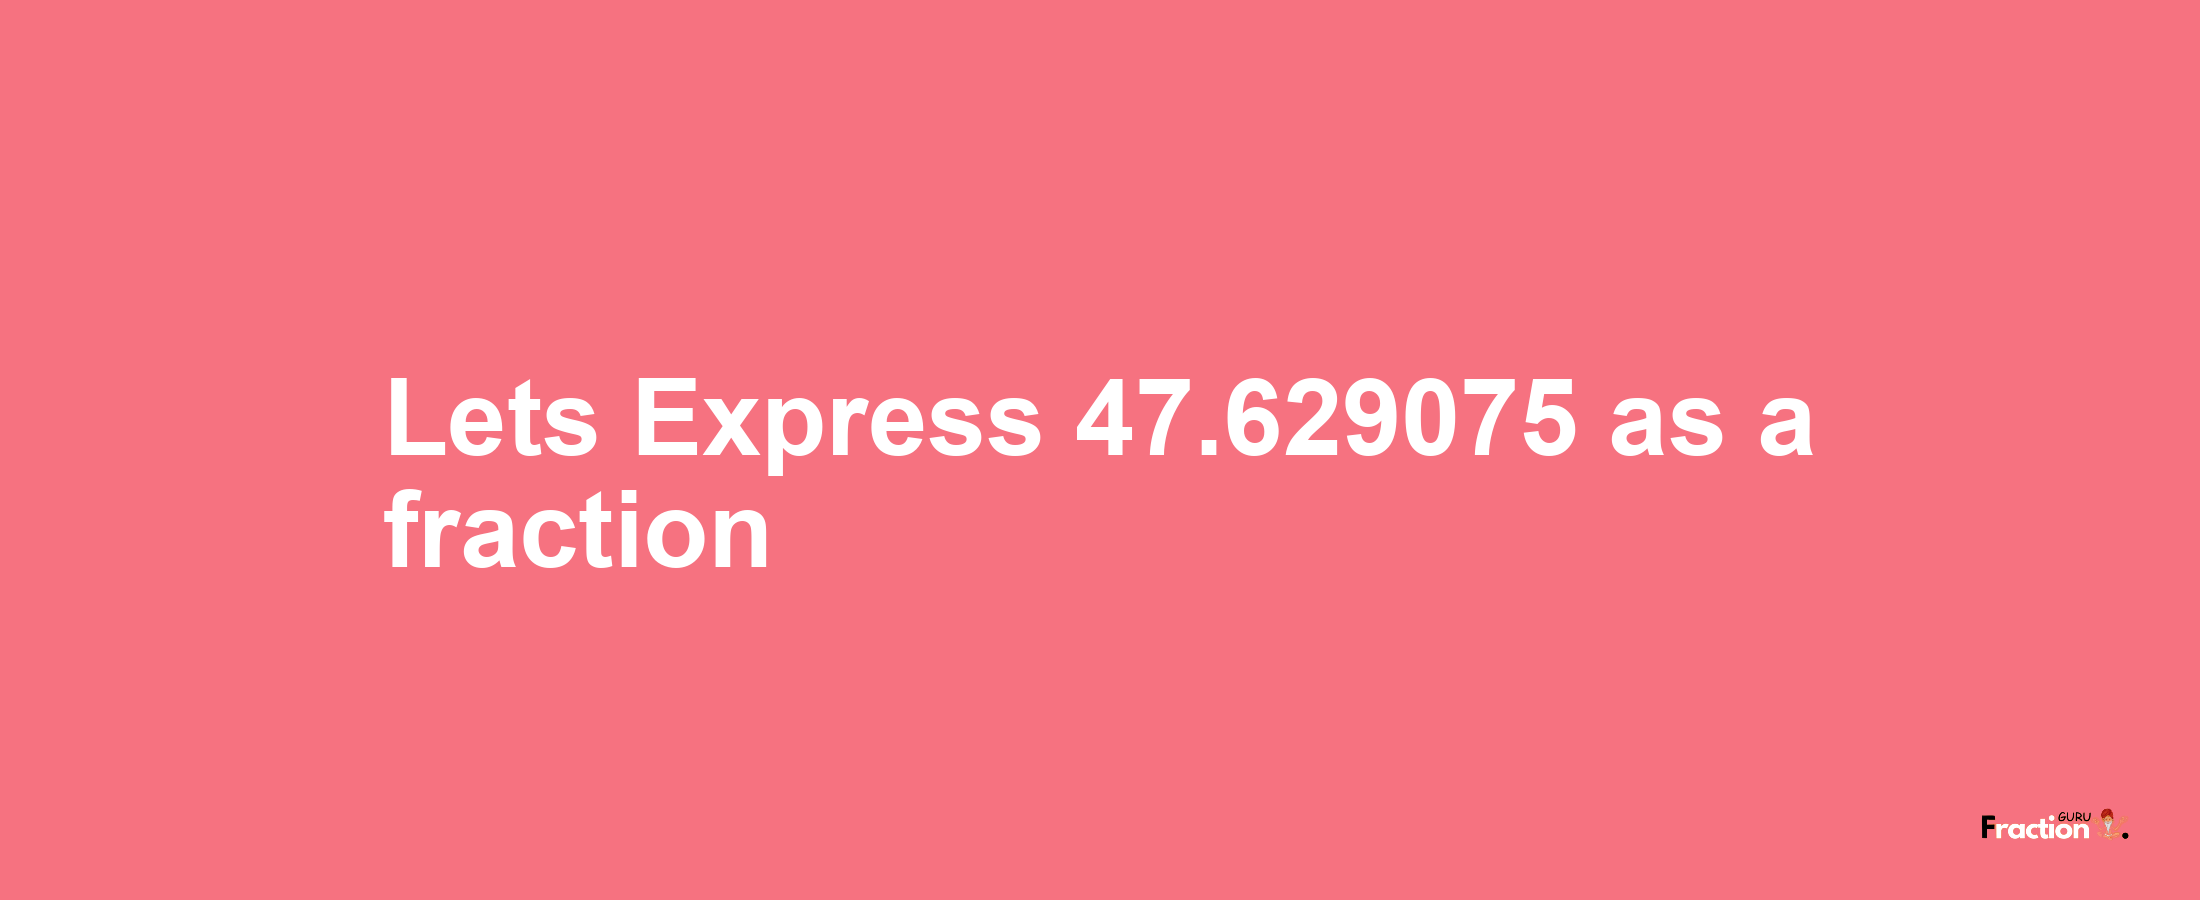 Lets Express 47.629075 as afraction